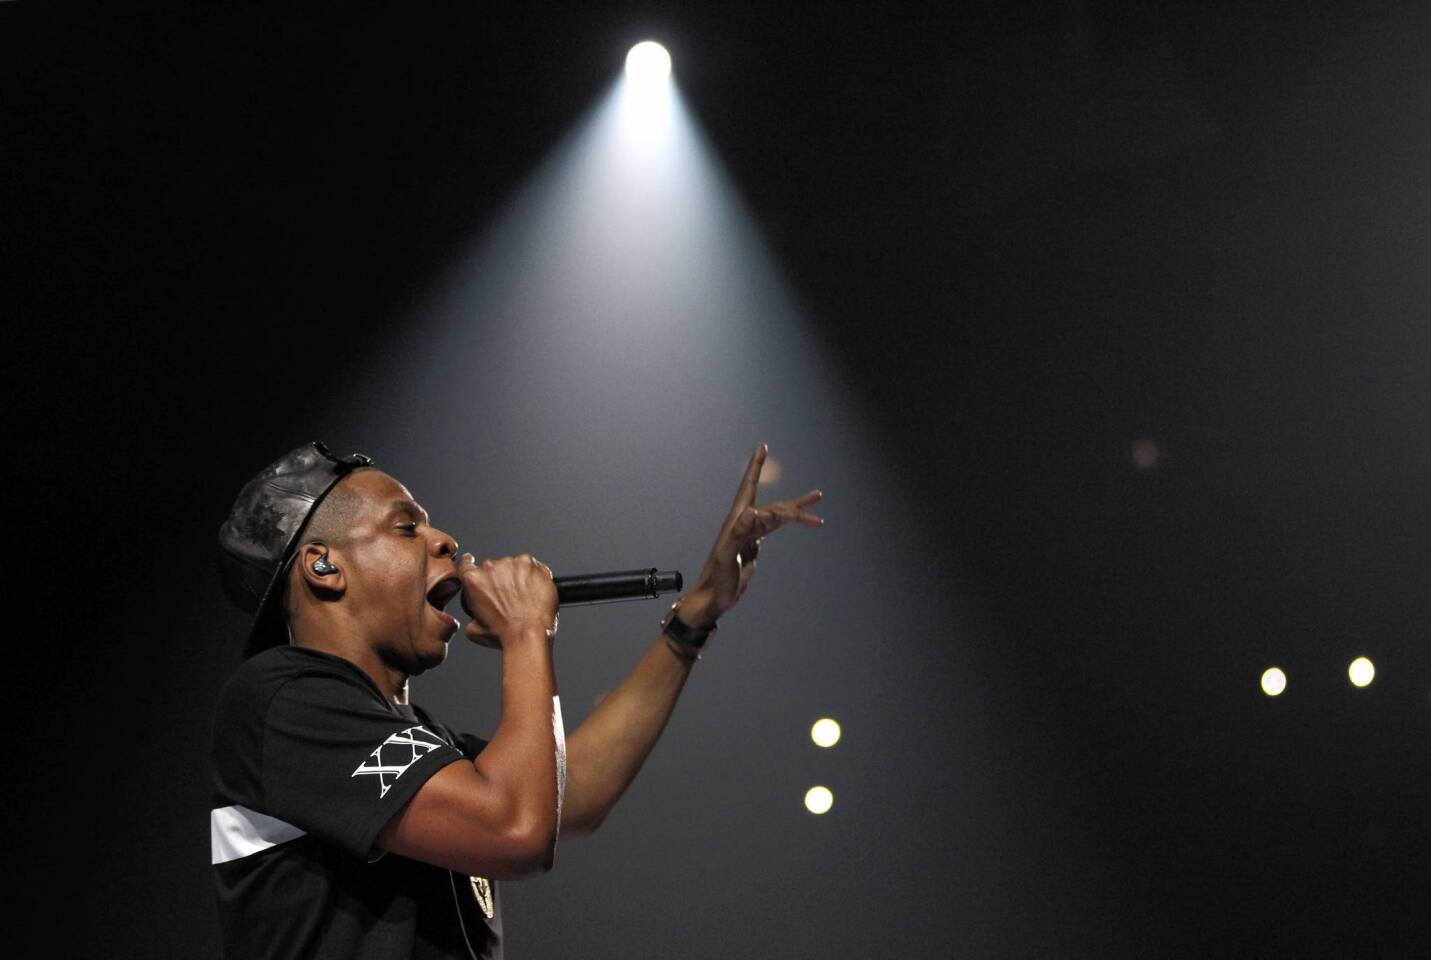 Jay Z at the United Center